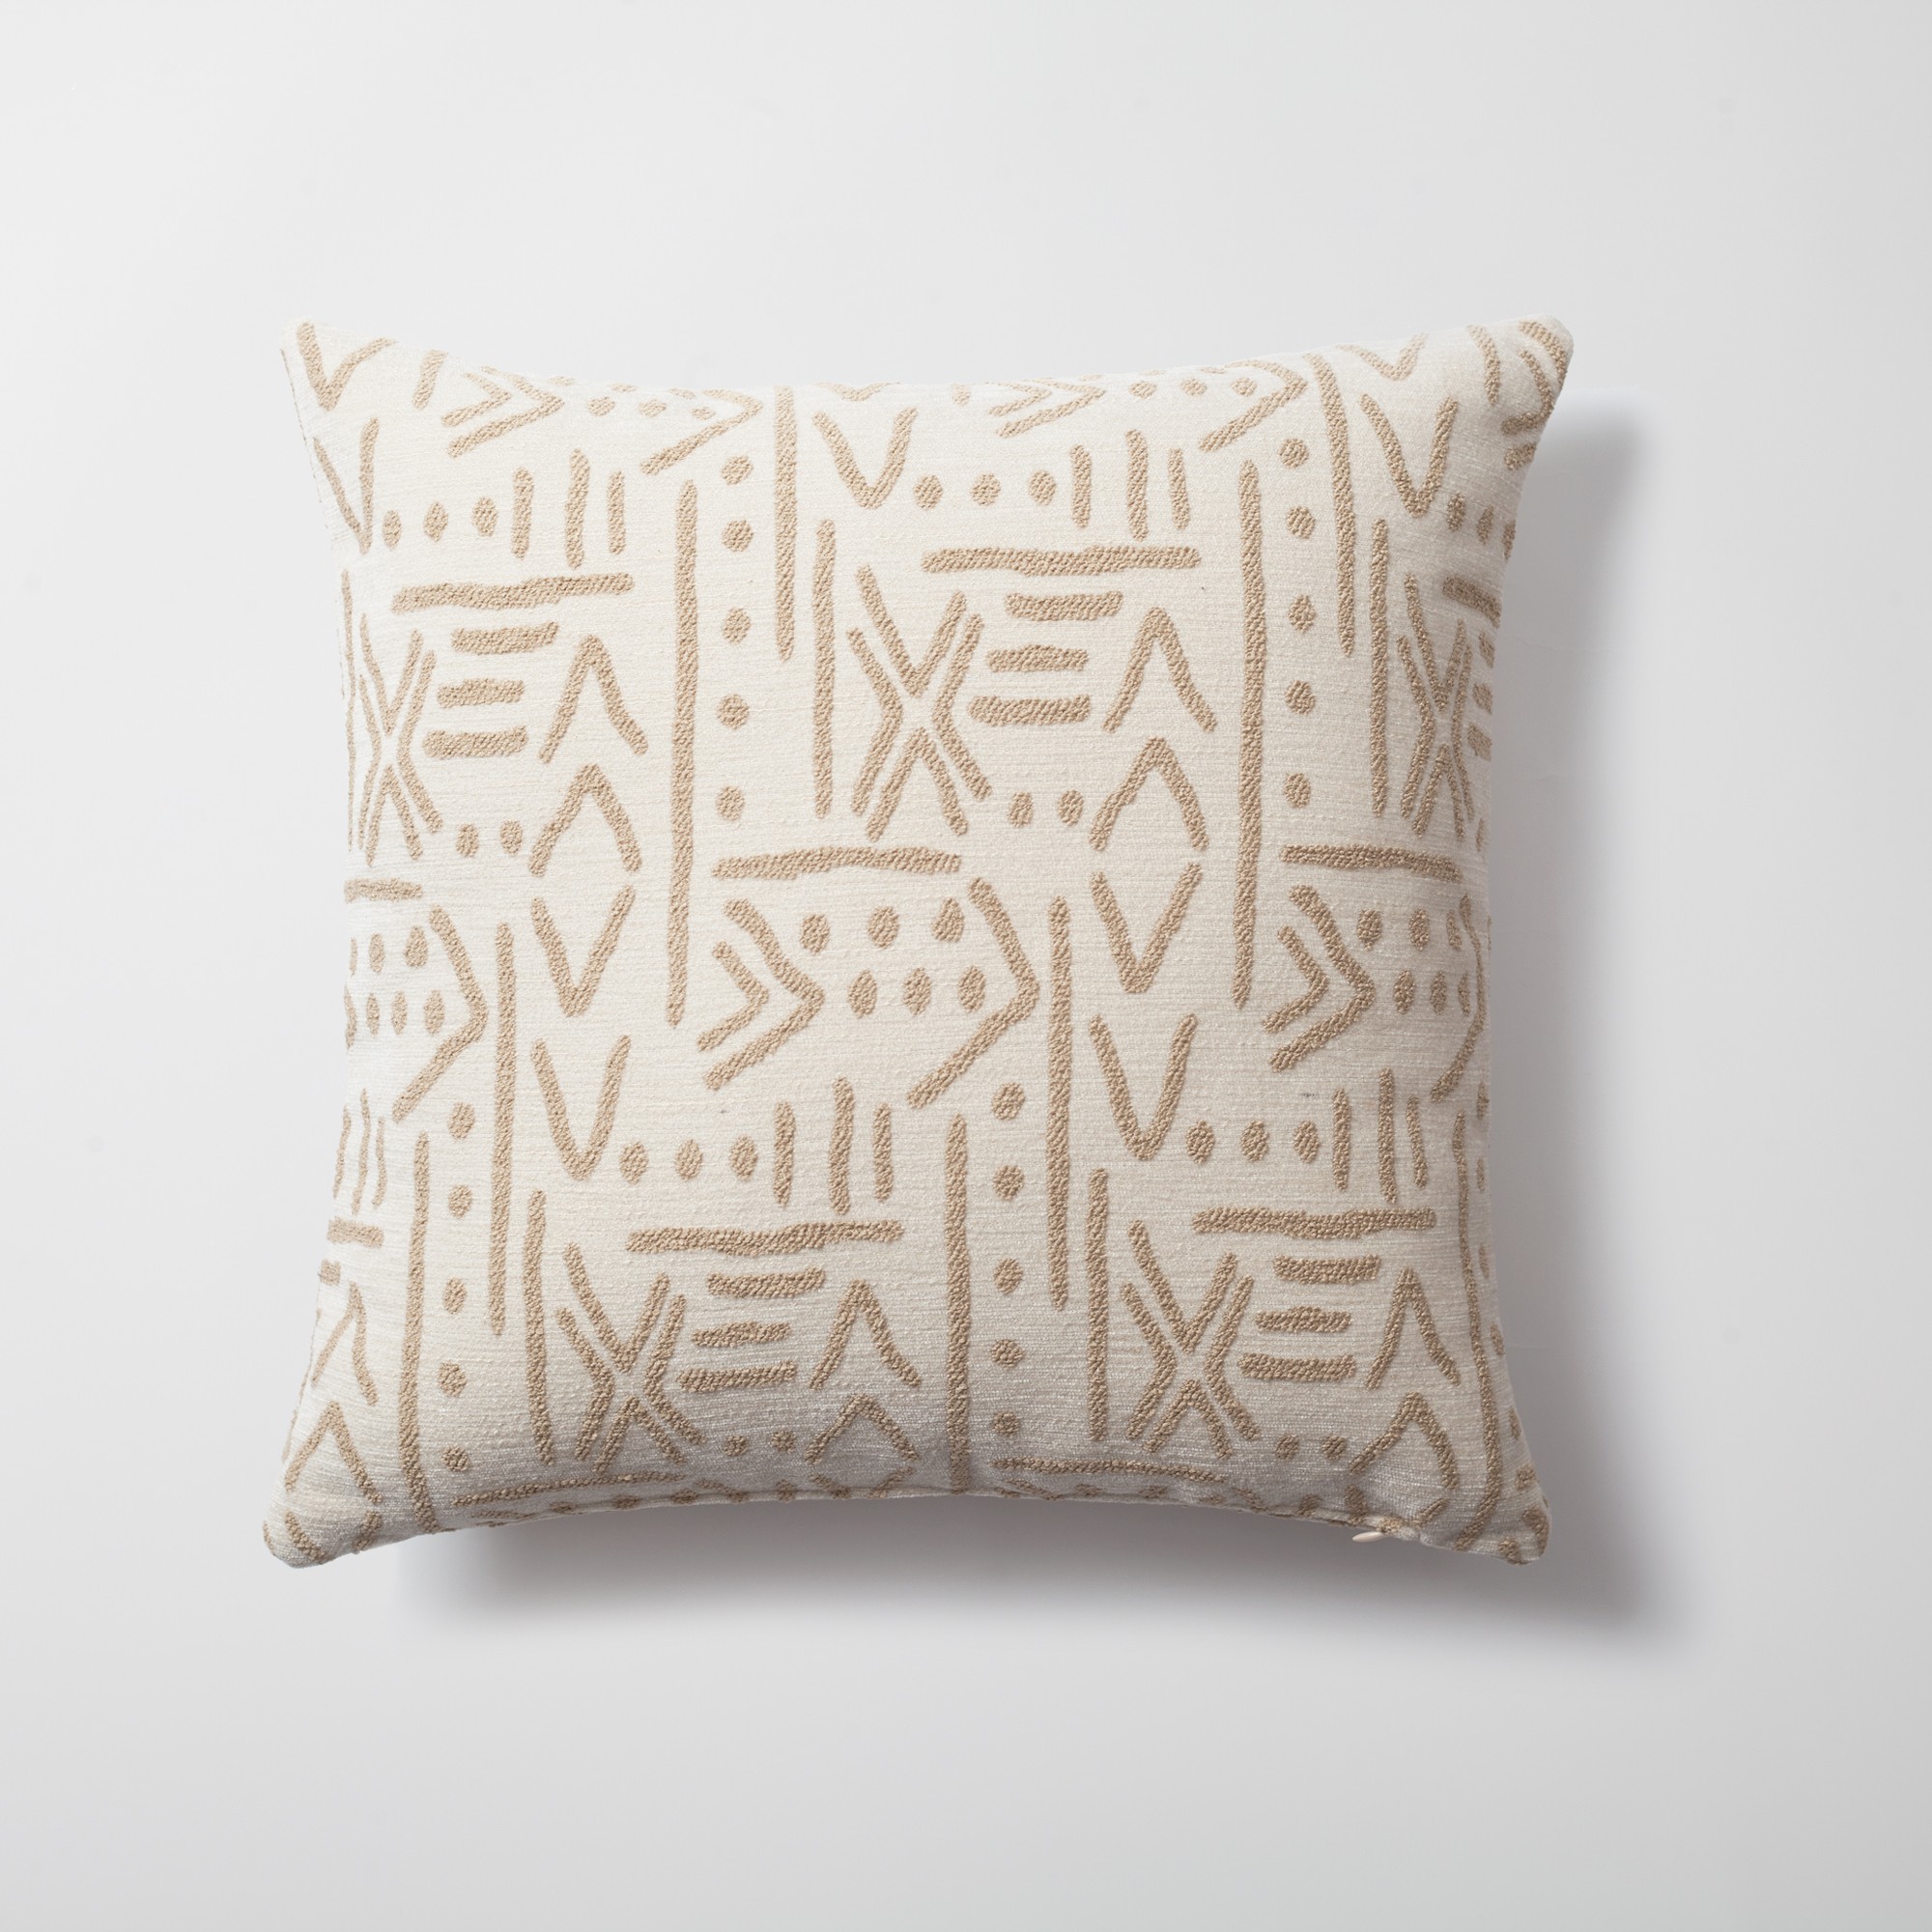 "Icon" - African Patterned 18x18 Inch Linen Pillow - Cream (Cover Only)